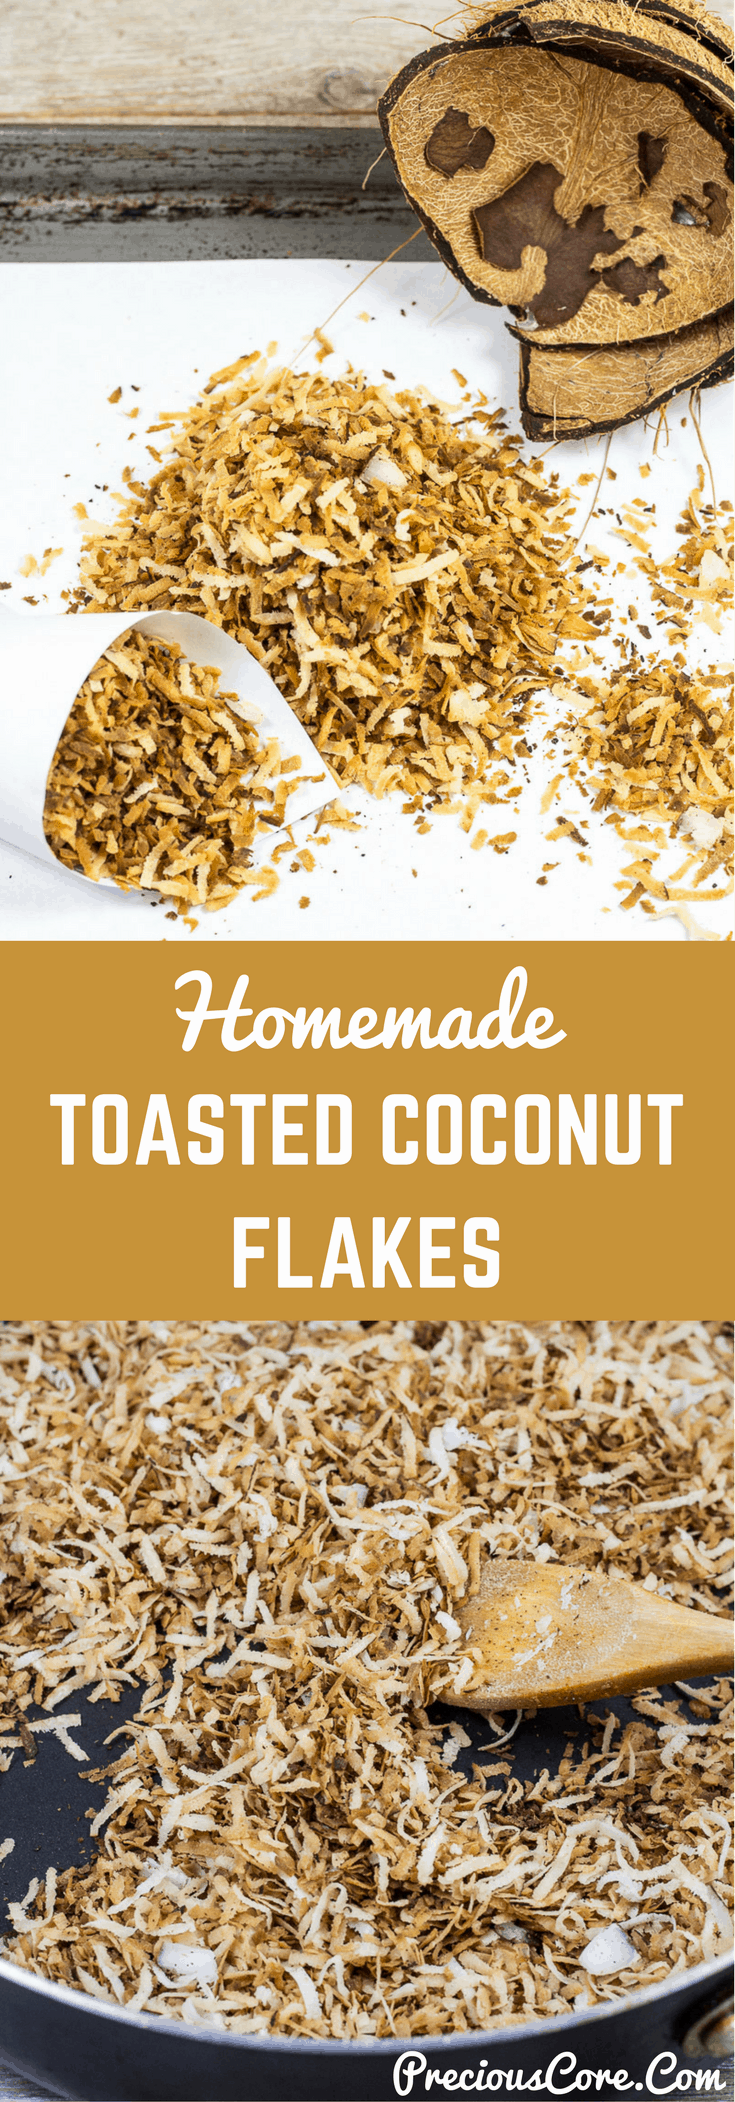 Collage of coconuts with text \"Homemade Toasted Coconut Flakes.\"